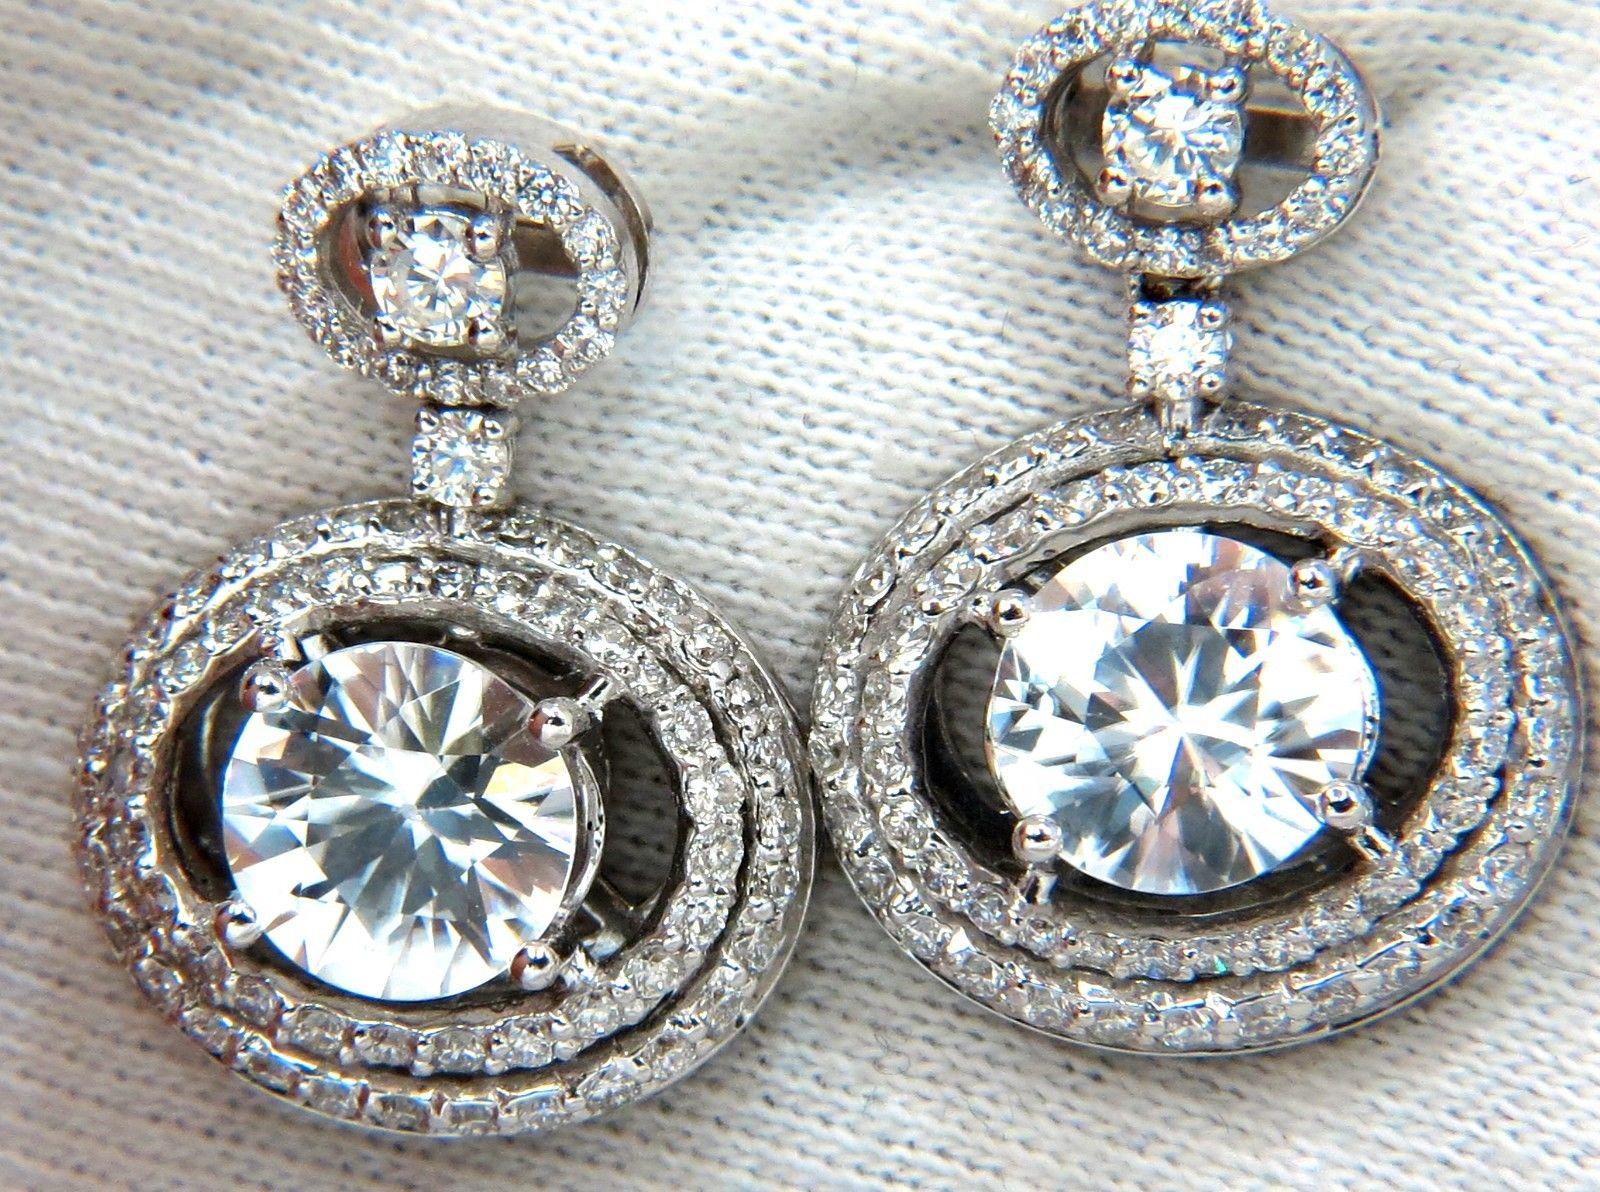 8.10ct. Natural Matching round zircons 

& 2.80ct natural diamonds earrings.

Zircon, clean clarity & transparent.

9.2mm diameter

brilliant in all angles.



2.80ct. Round Brilliant full cut diamonds.

G-color Vs-2 clarity

Overall earrings